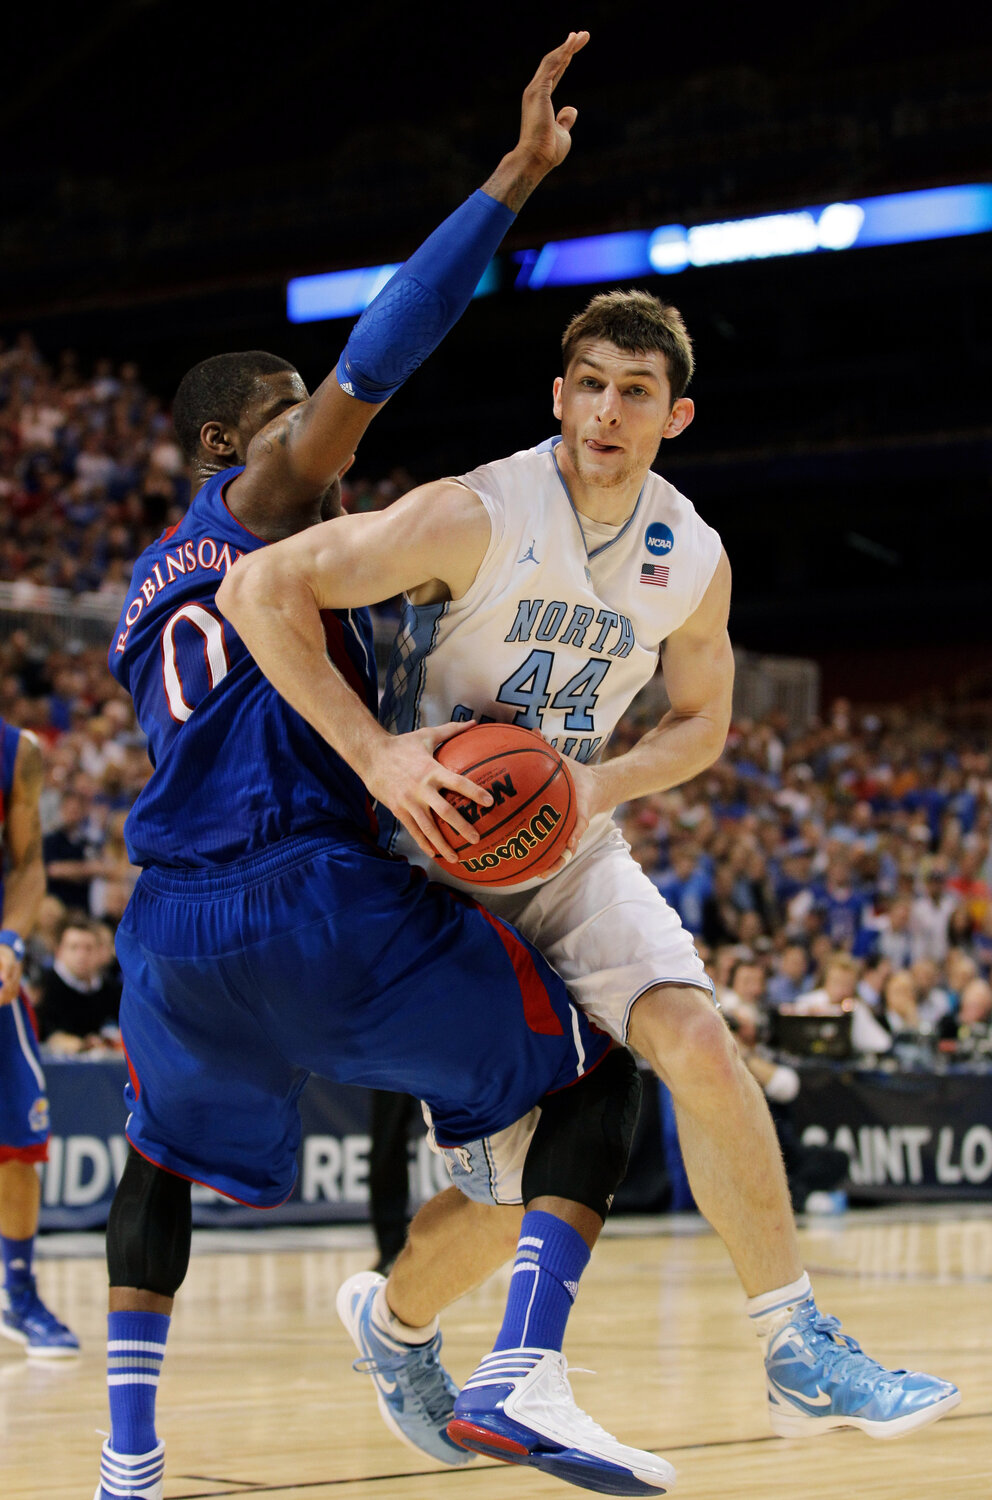 Cutline: Tyler Zeller, battling against Kansas in the NCAA Tournament during his UNC playing days, is in his third season as an assistant at Northwood.